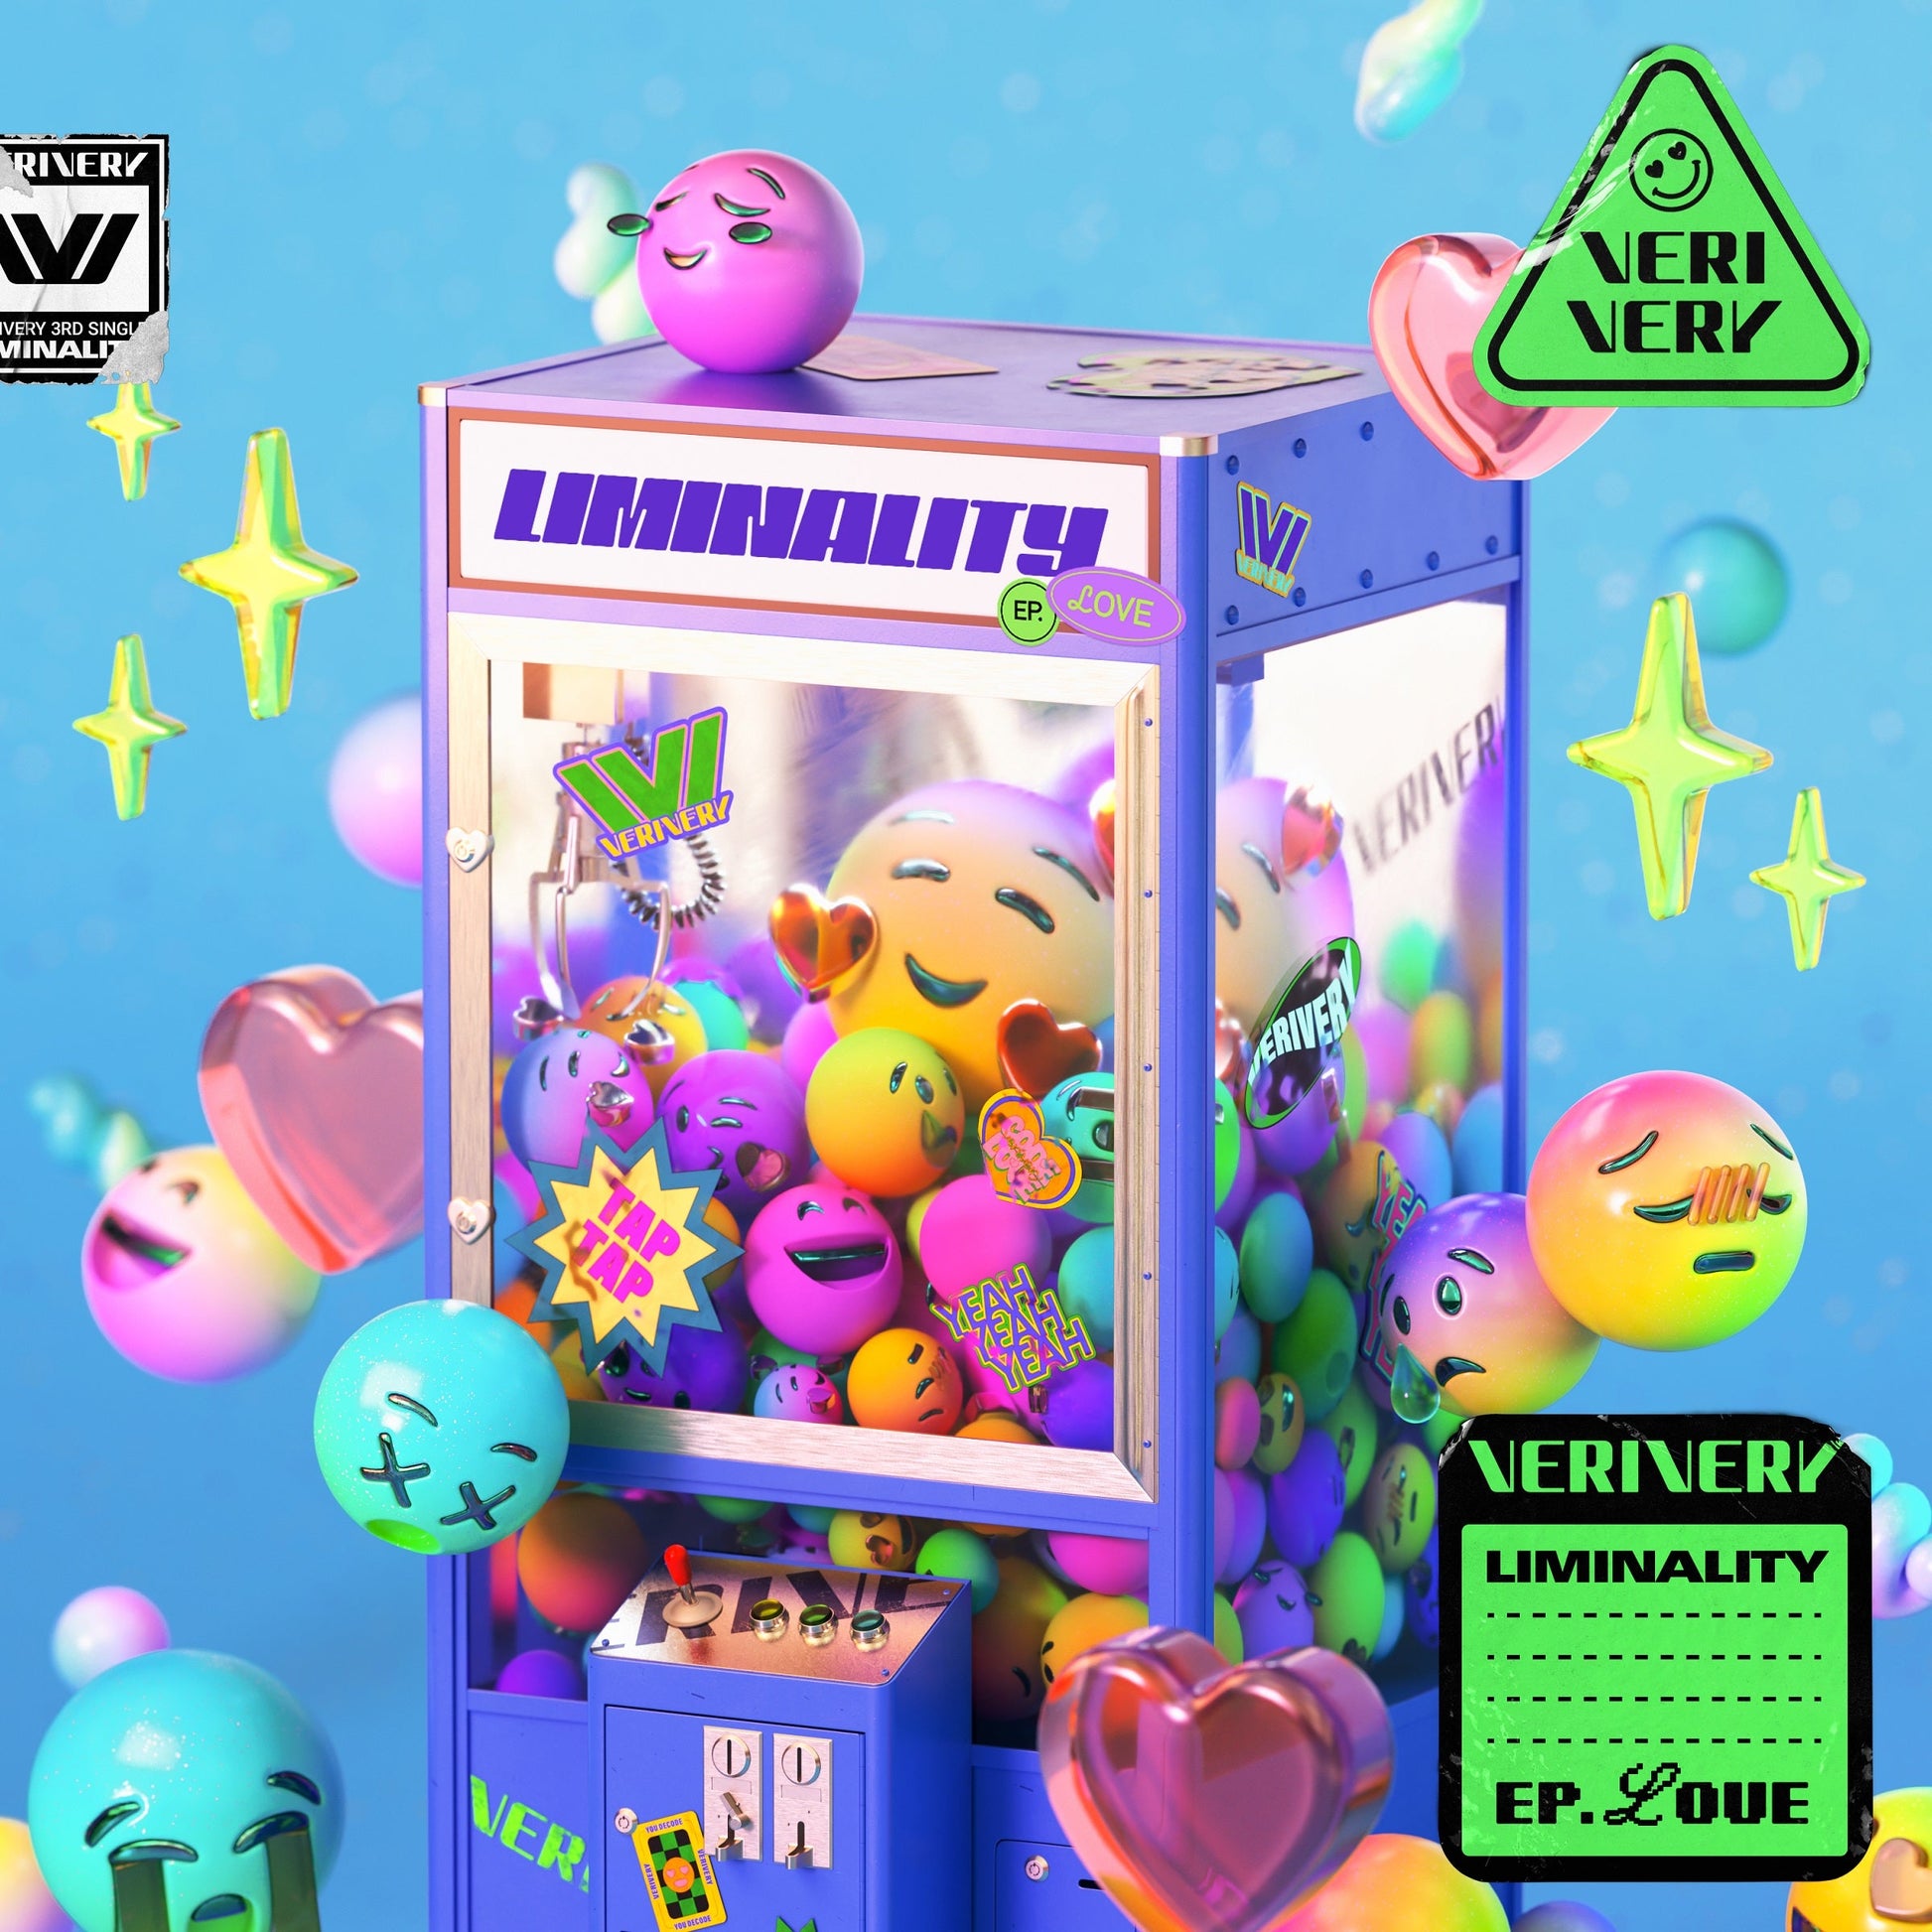 VERIVERY 3RD SINGLE ALBUM 'LIMINALITY - EP.LOVE' OVER VERSION COVER